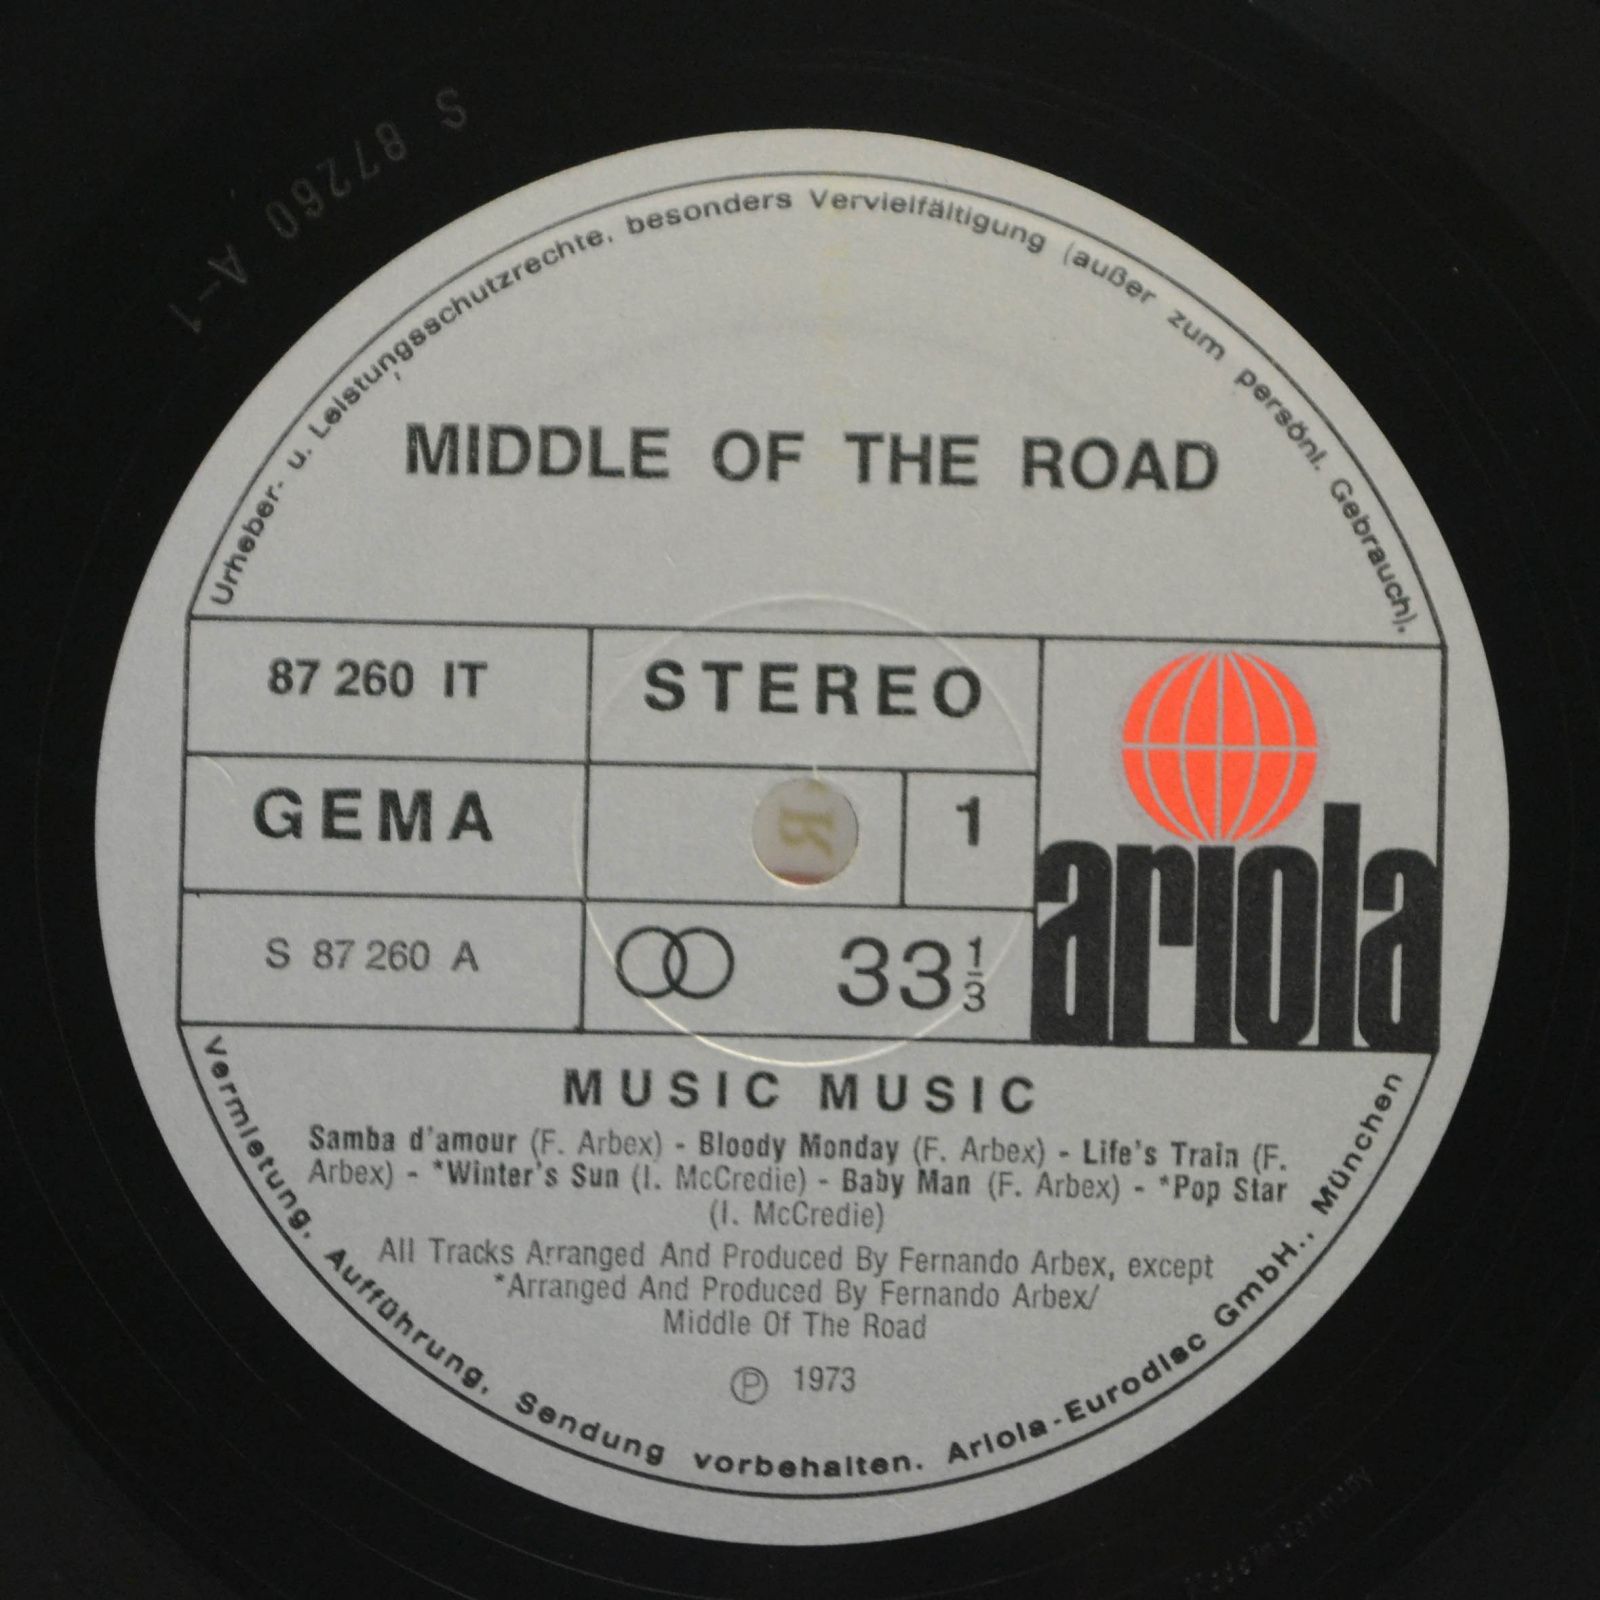 Middle Of The Road — Music Music, 1973